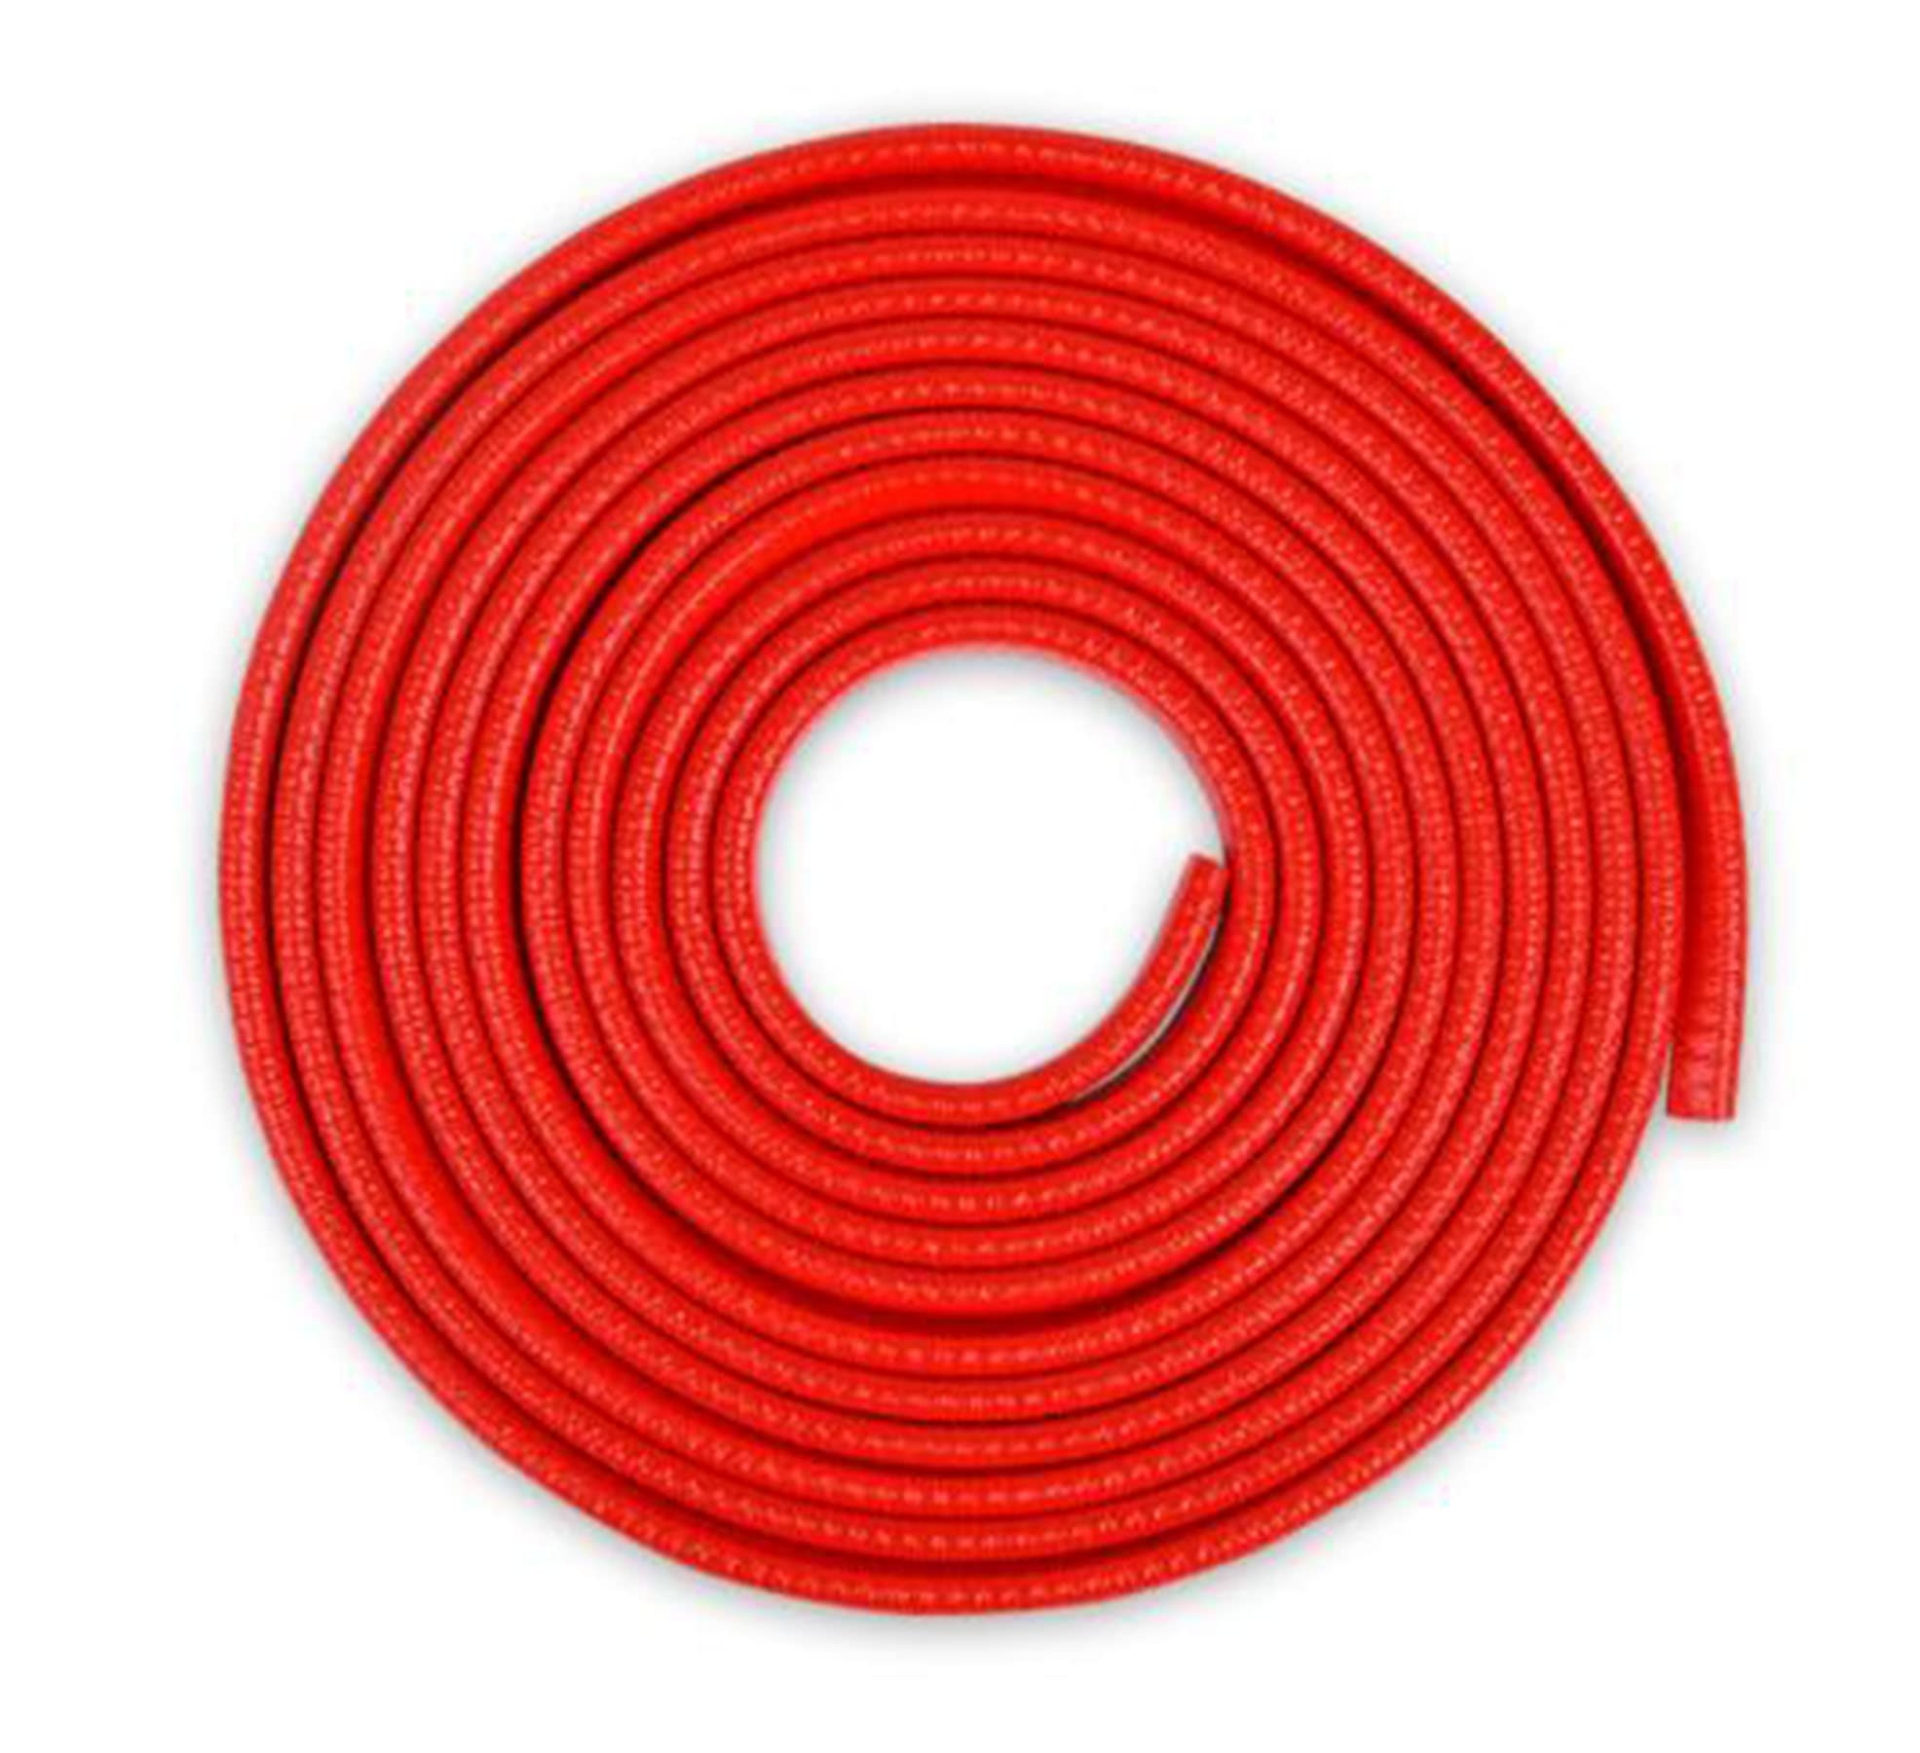 5 Metre Car Door Edge Protection, Car Door Edge Protector, Rubber Seal, Trim Sealing Strip, No Glue, for Car, Truck, Engine Protection (Red)